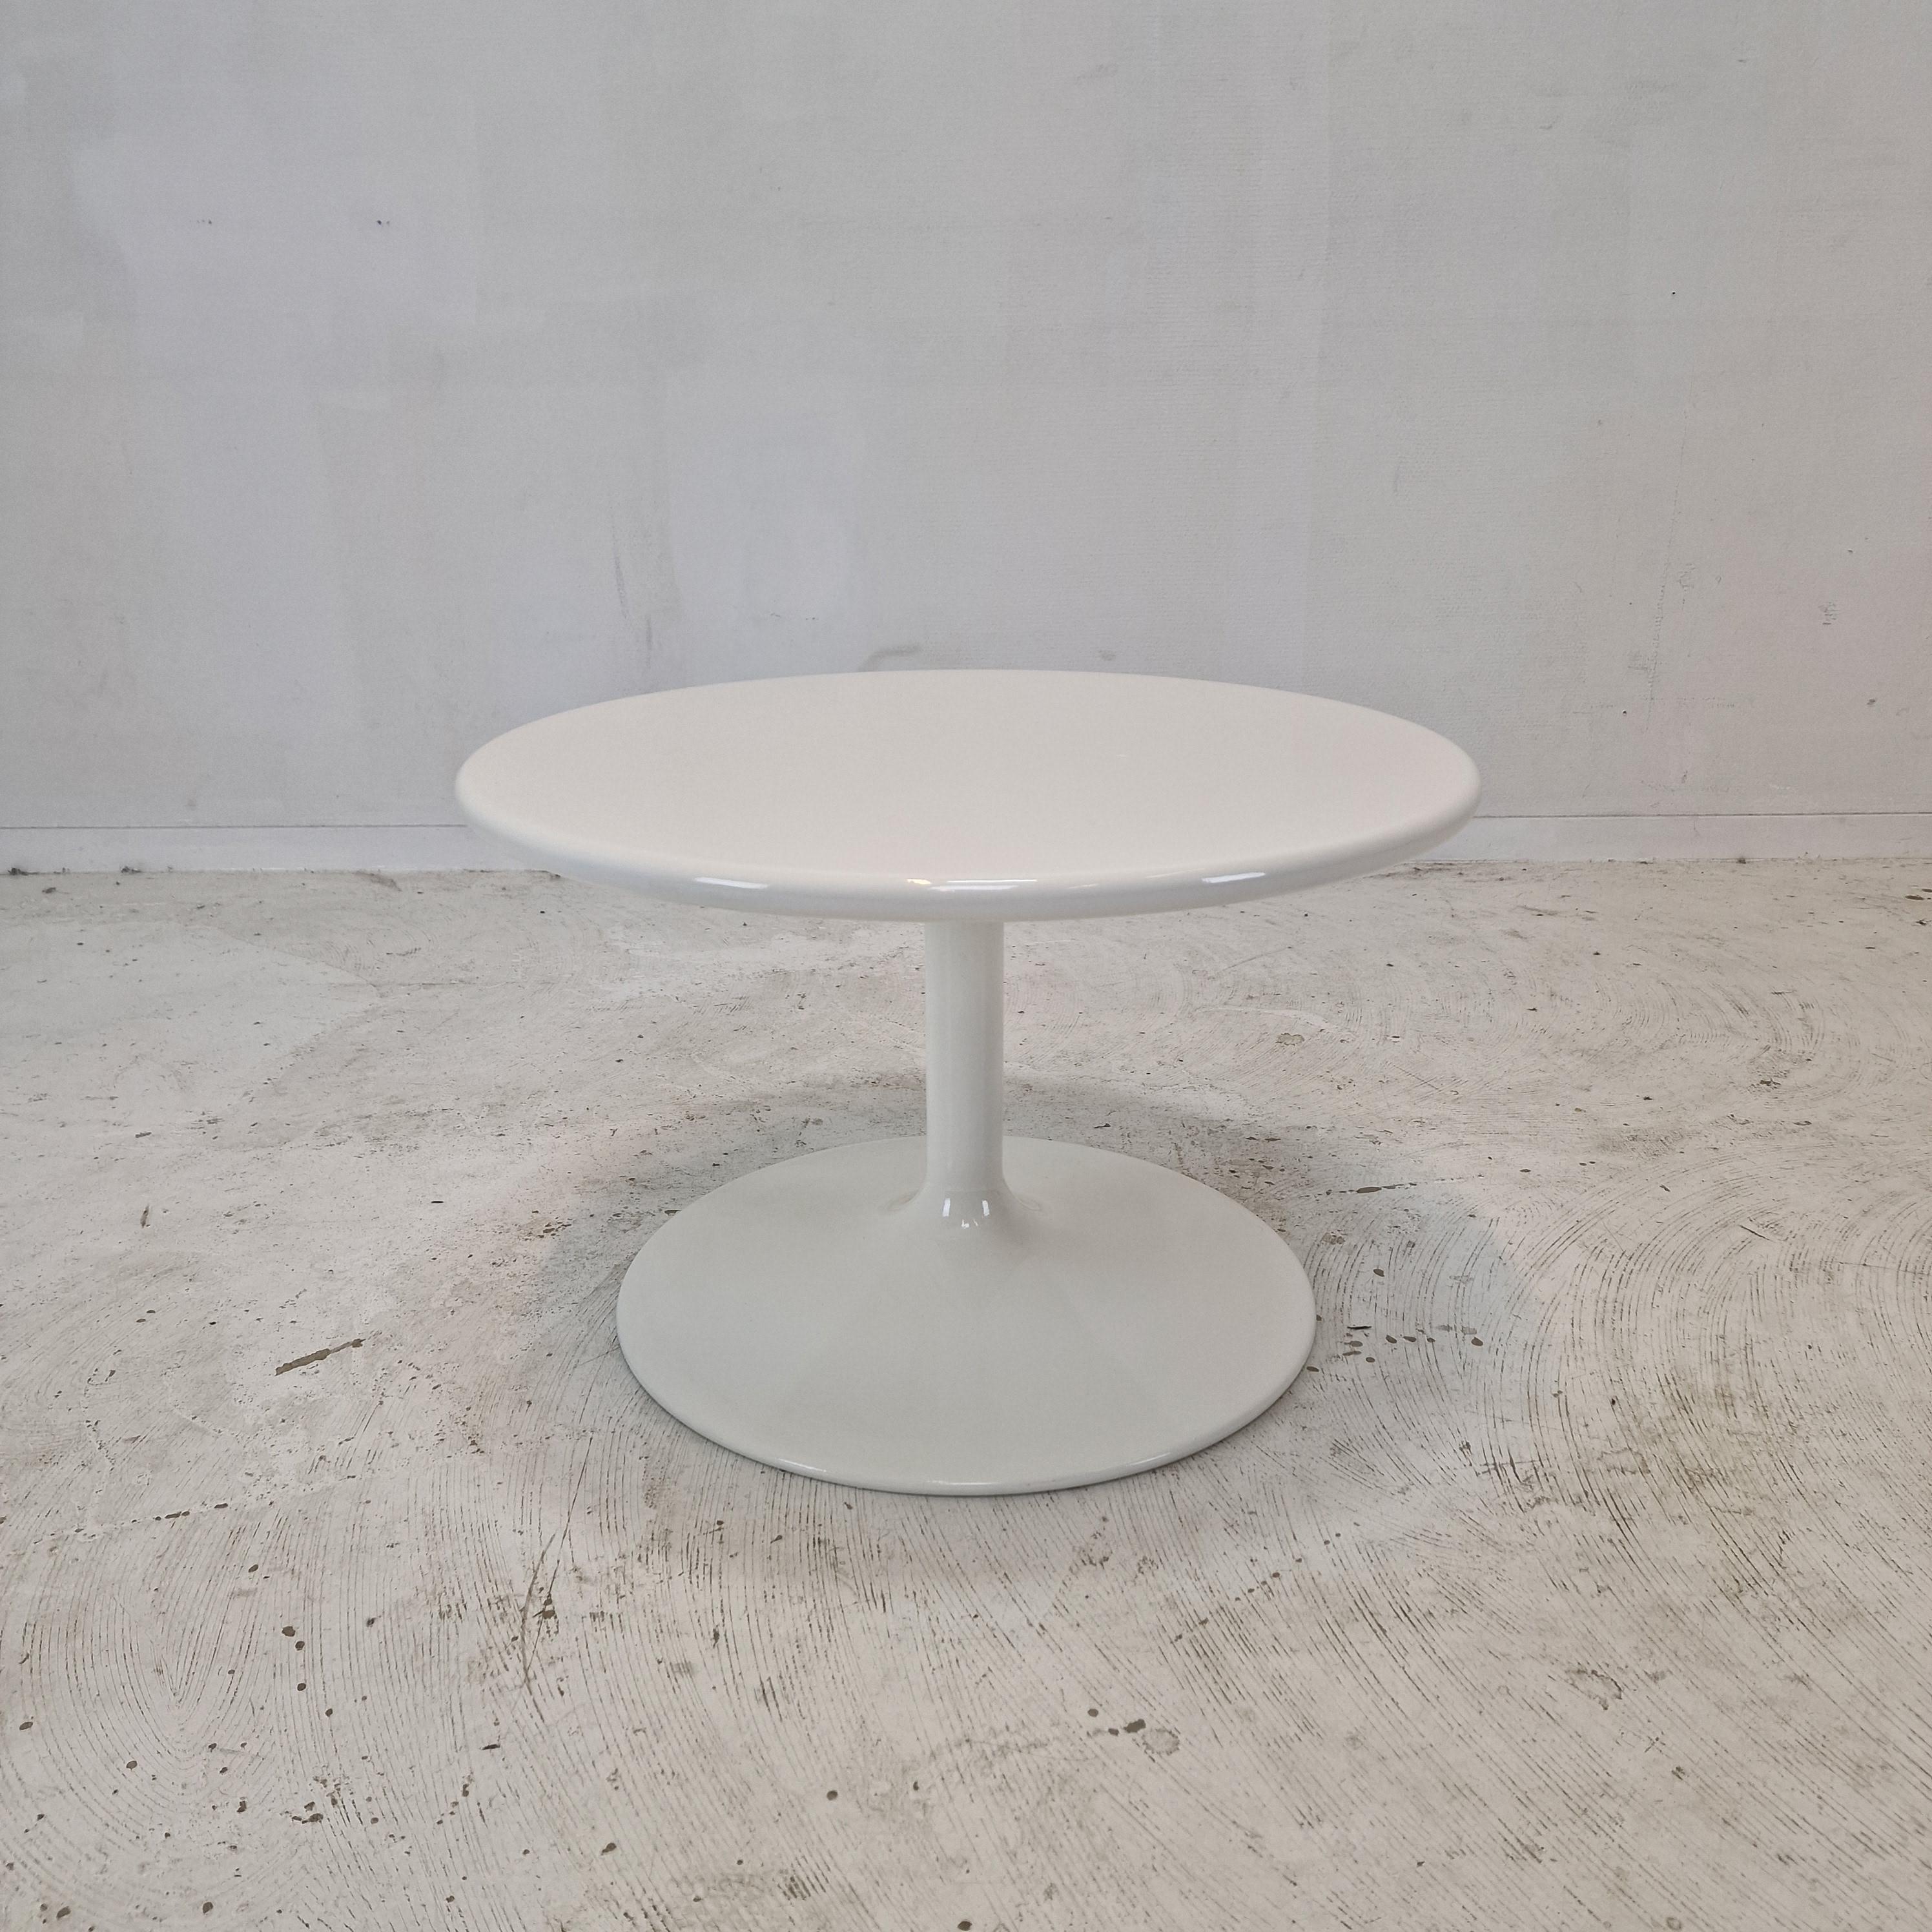 Very nice round coffee table, designed by Pierre Paulin in the 70's. 
The name of the table is 